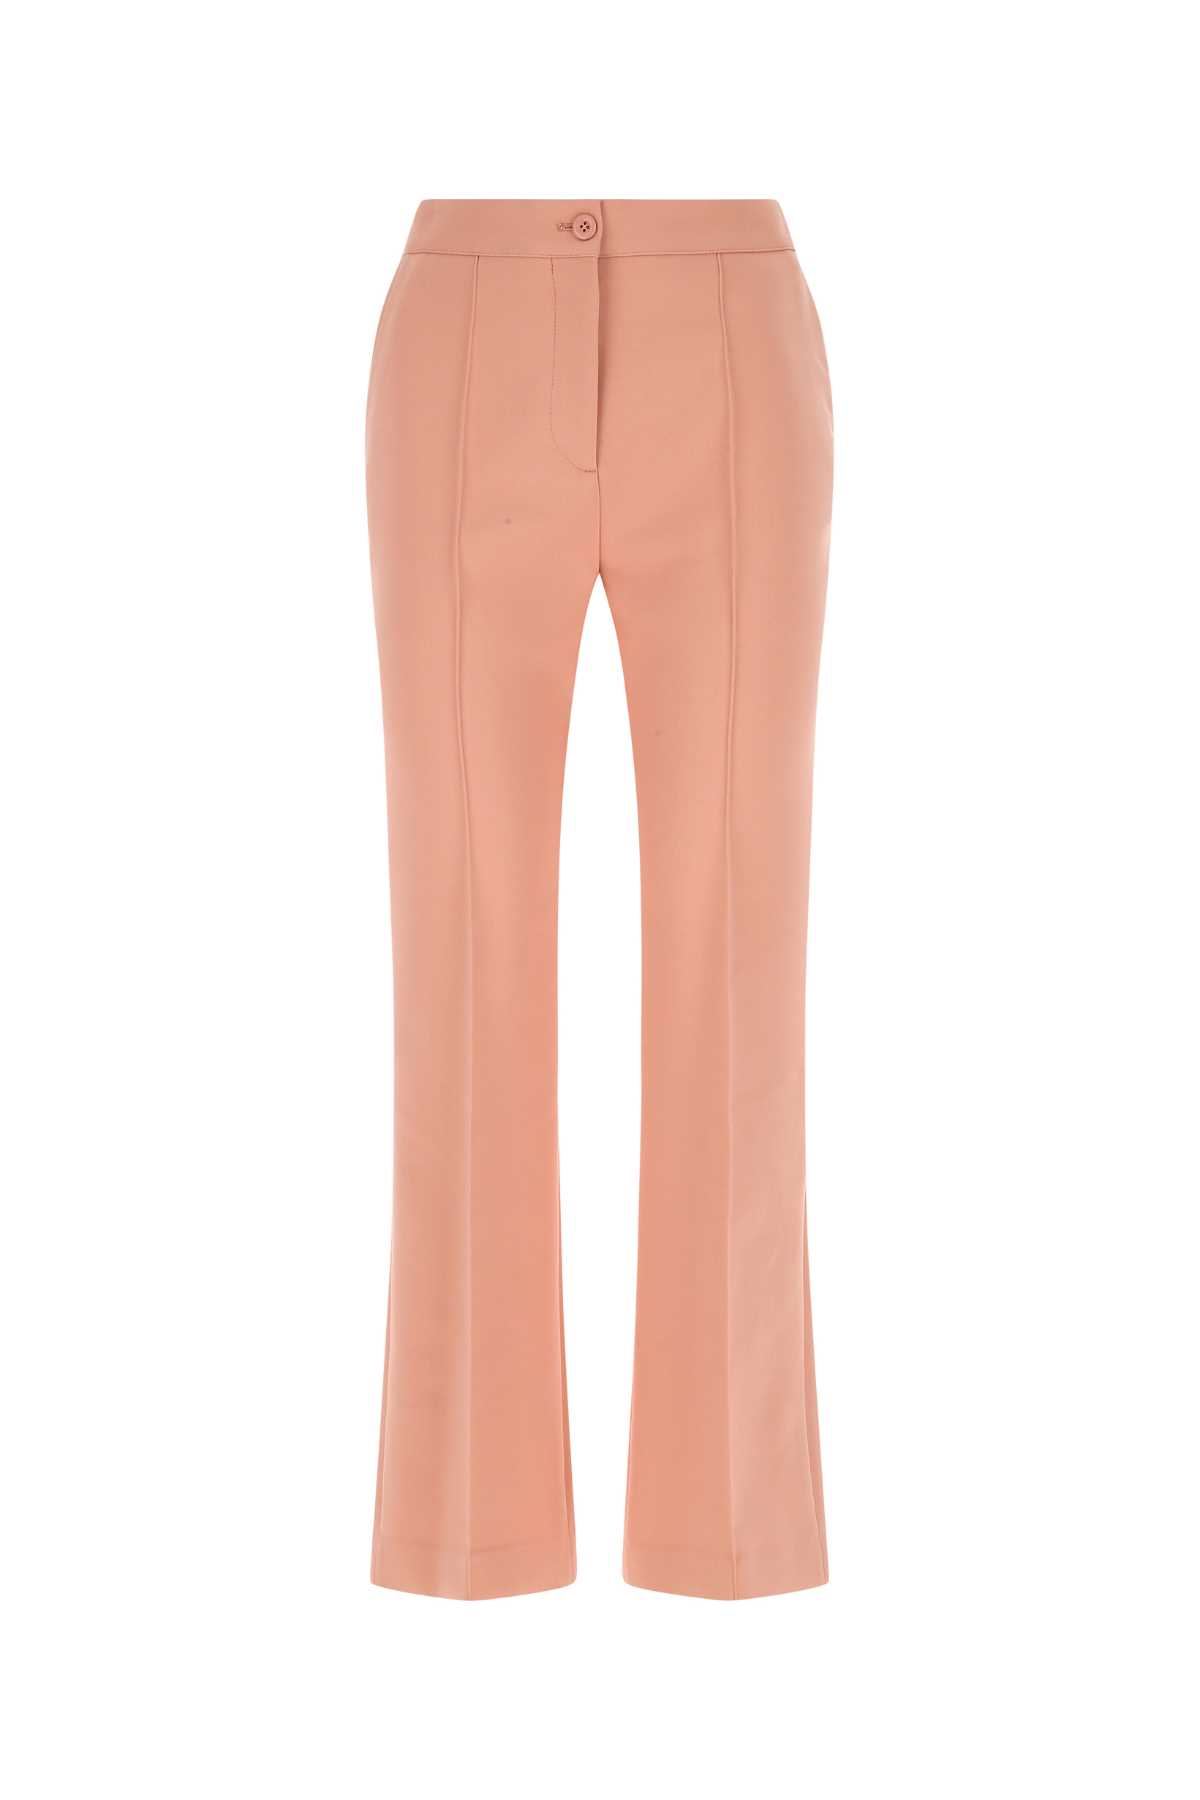 See by Chloé Dark Pink Stretch Cotton Blend Palazzo Pant